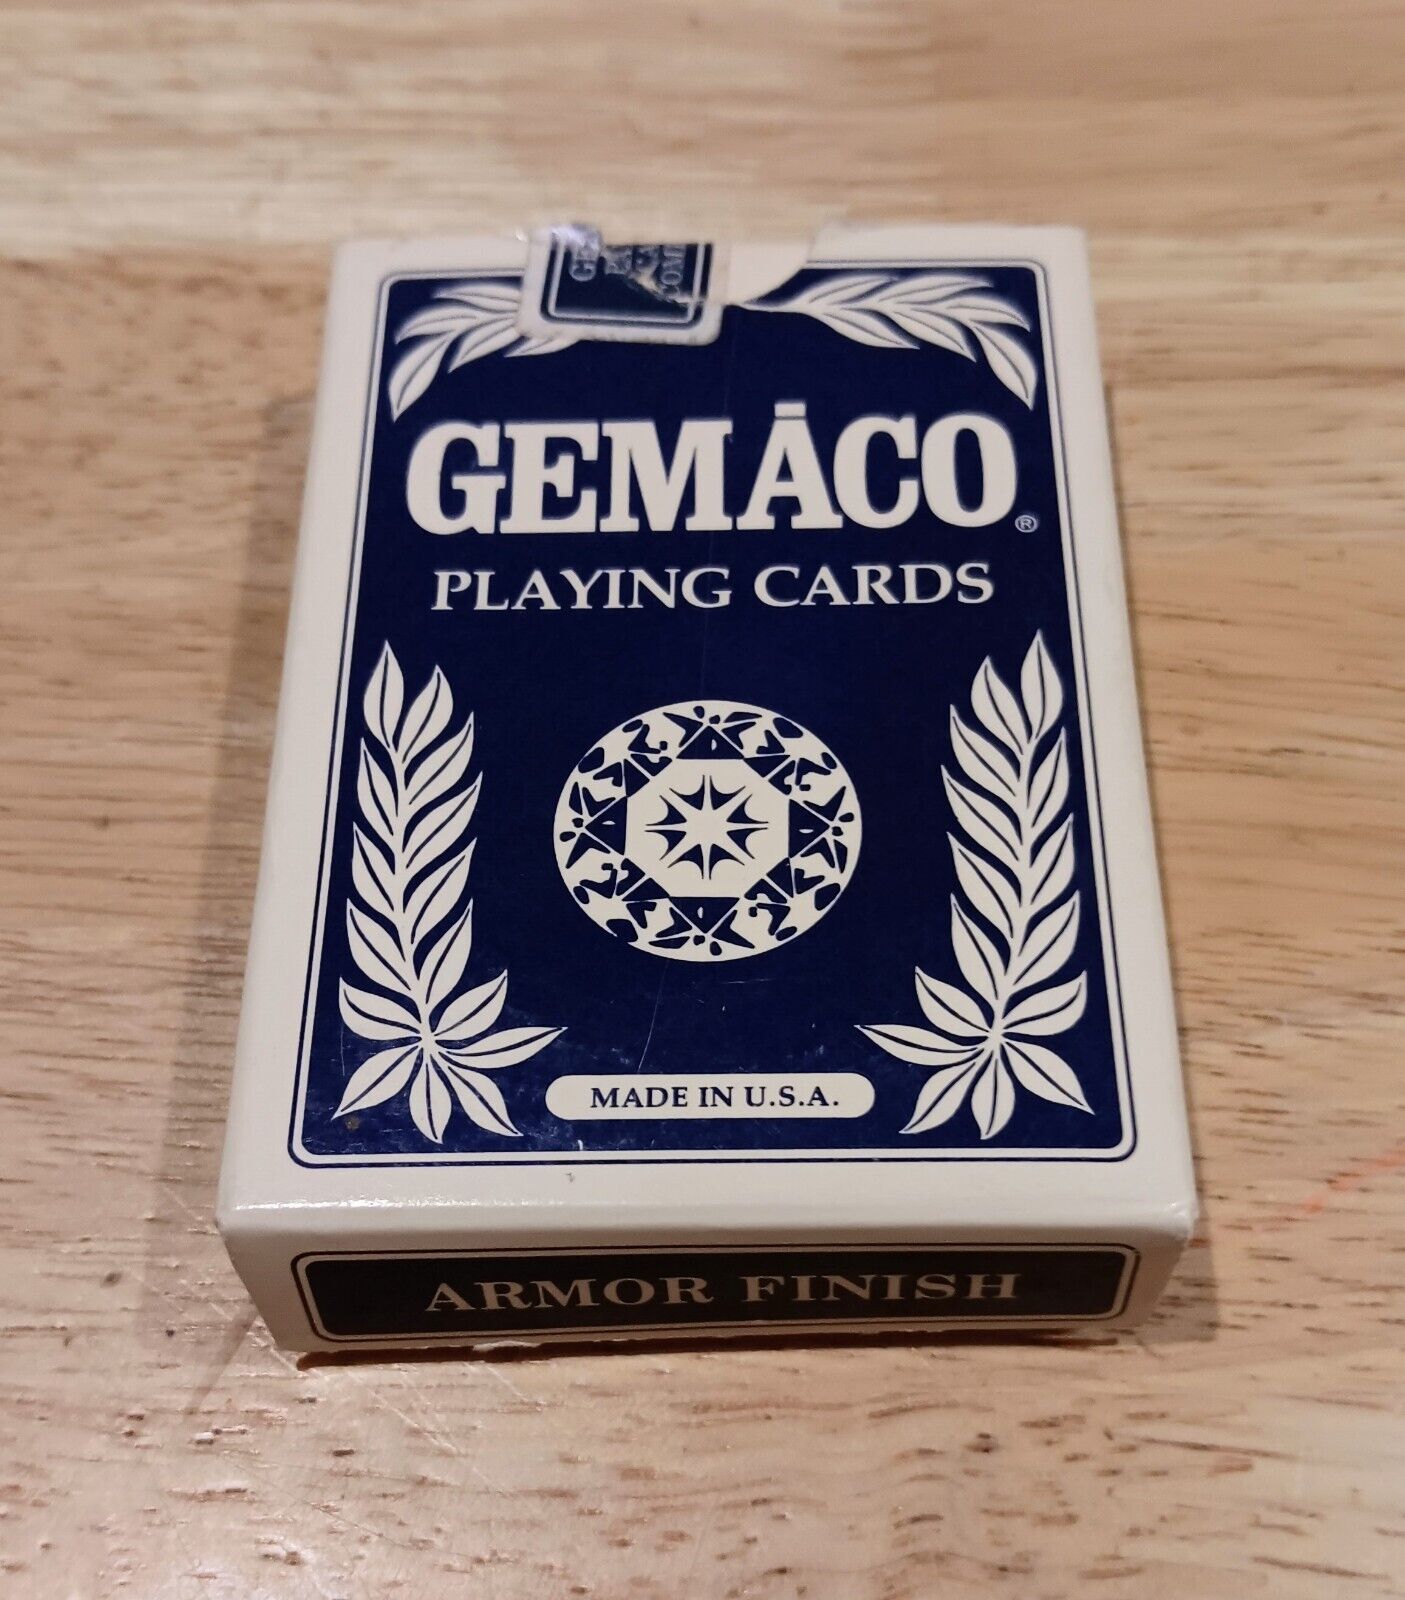 Vintage Gemaco Empress Casino Playing Cards Armor Finish